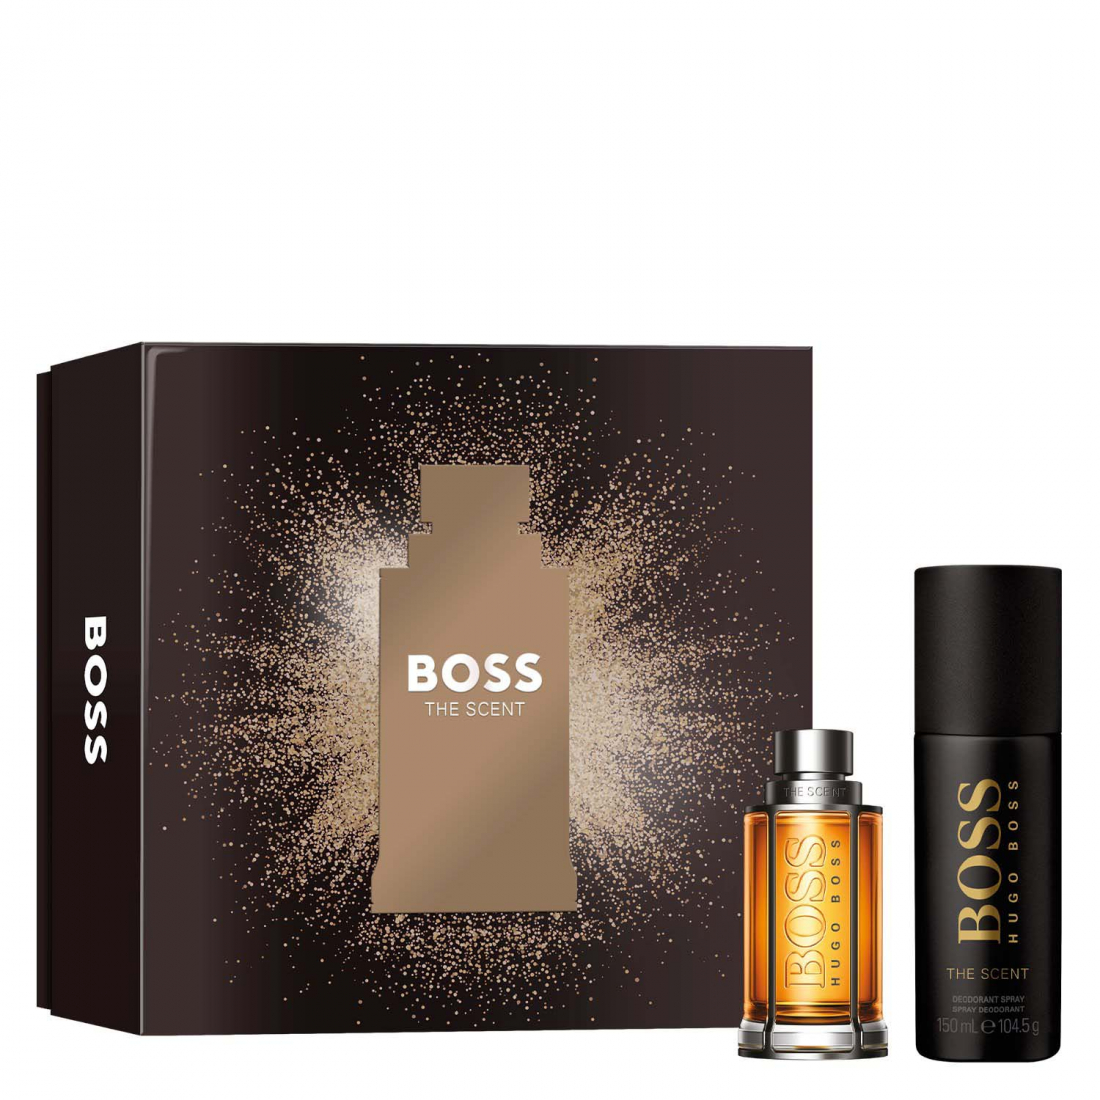 'The Scent For Him' Perfume Set - 2 Pieces